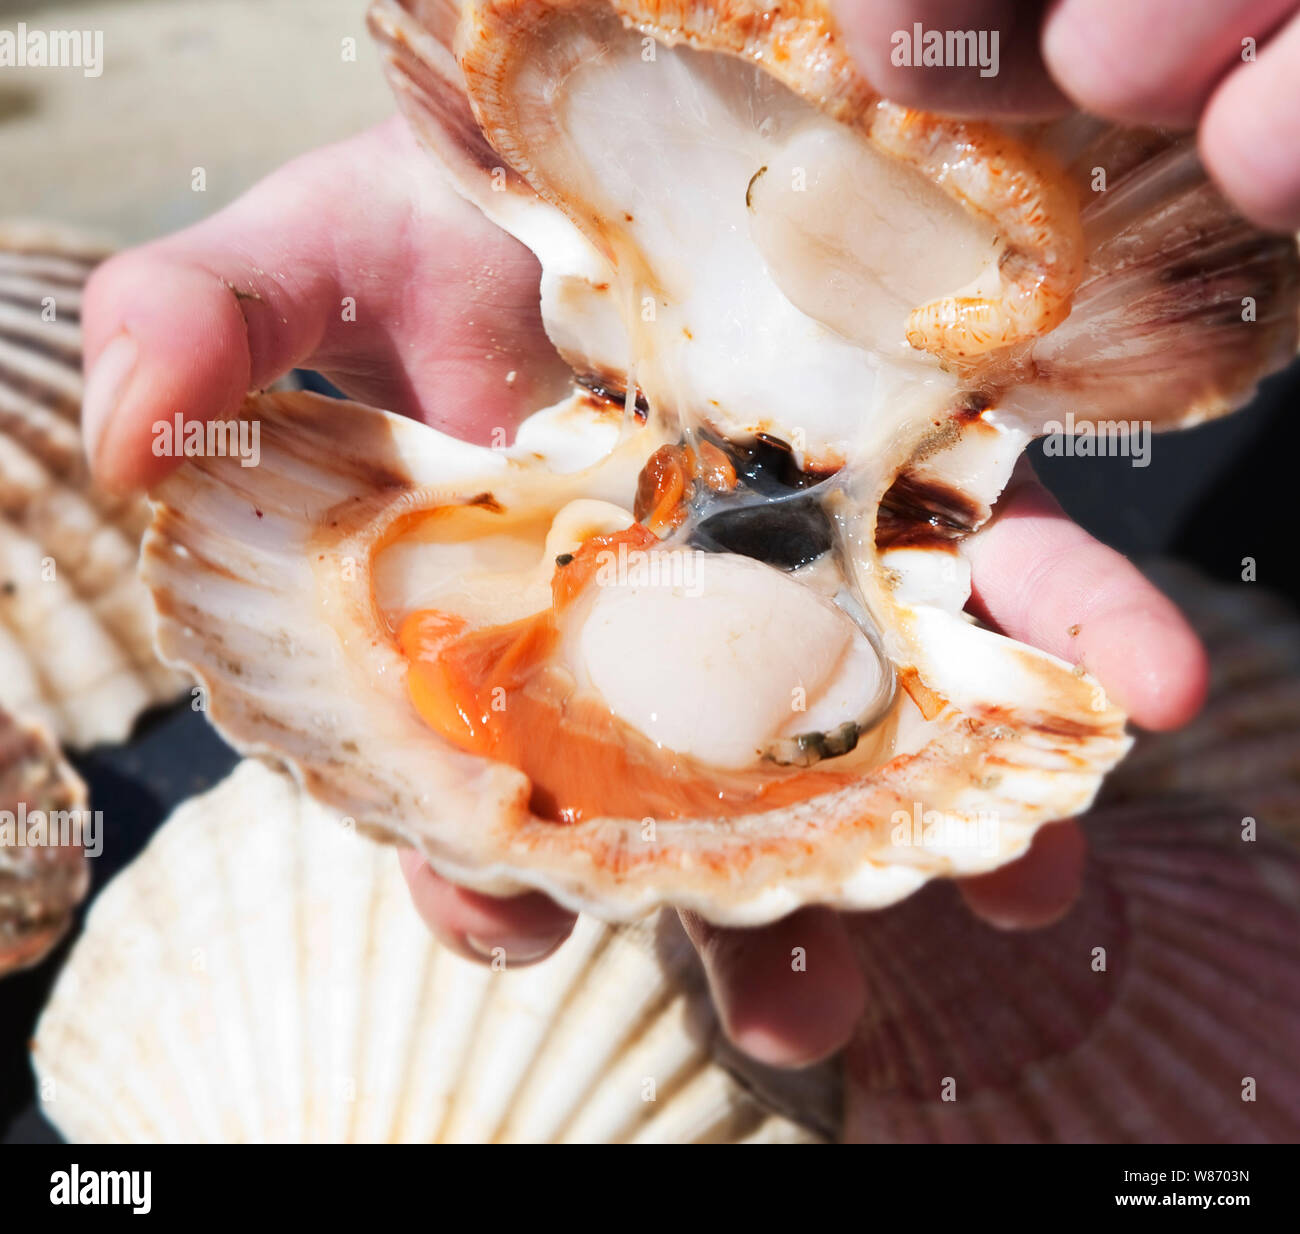 freshly caught scallops with their shells being opened. Stock Photo